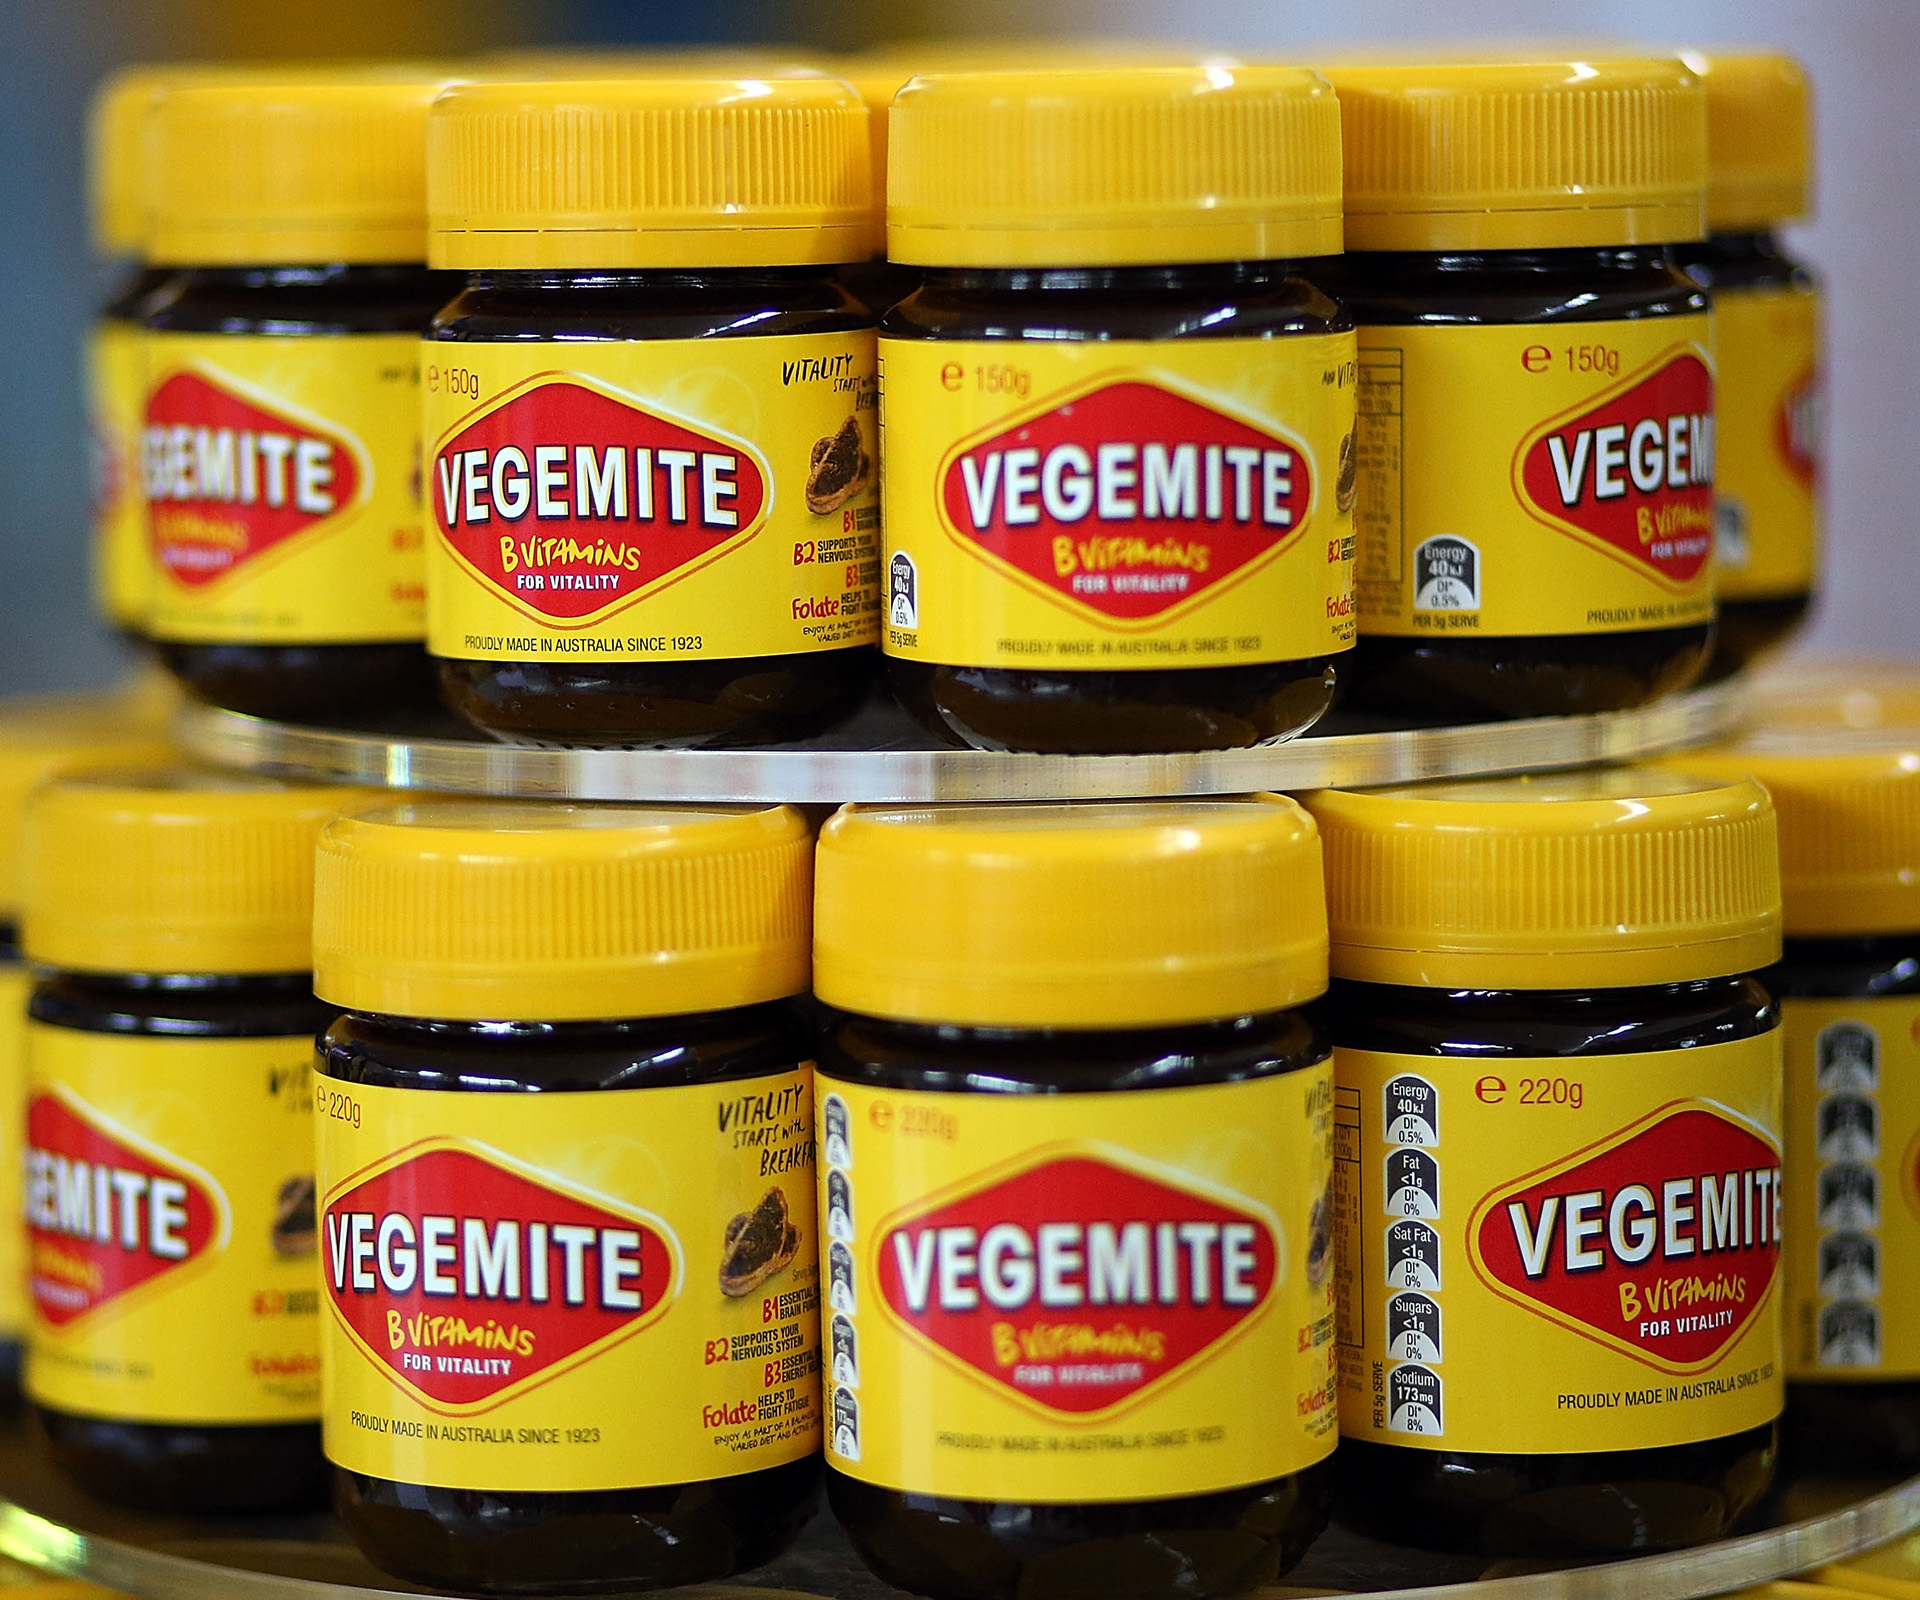 Vegemite is now owned by Australian company Bega.